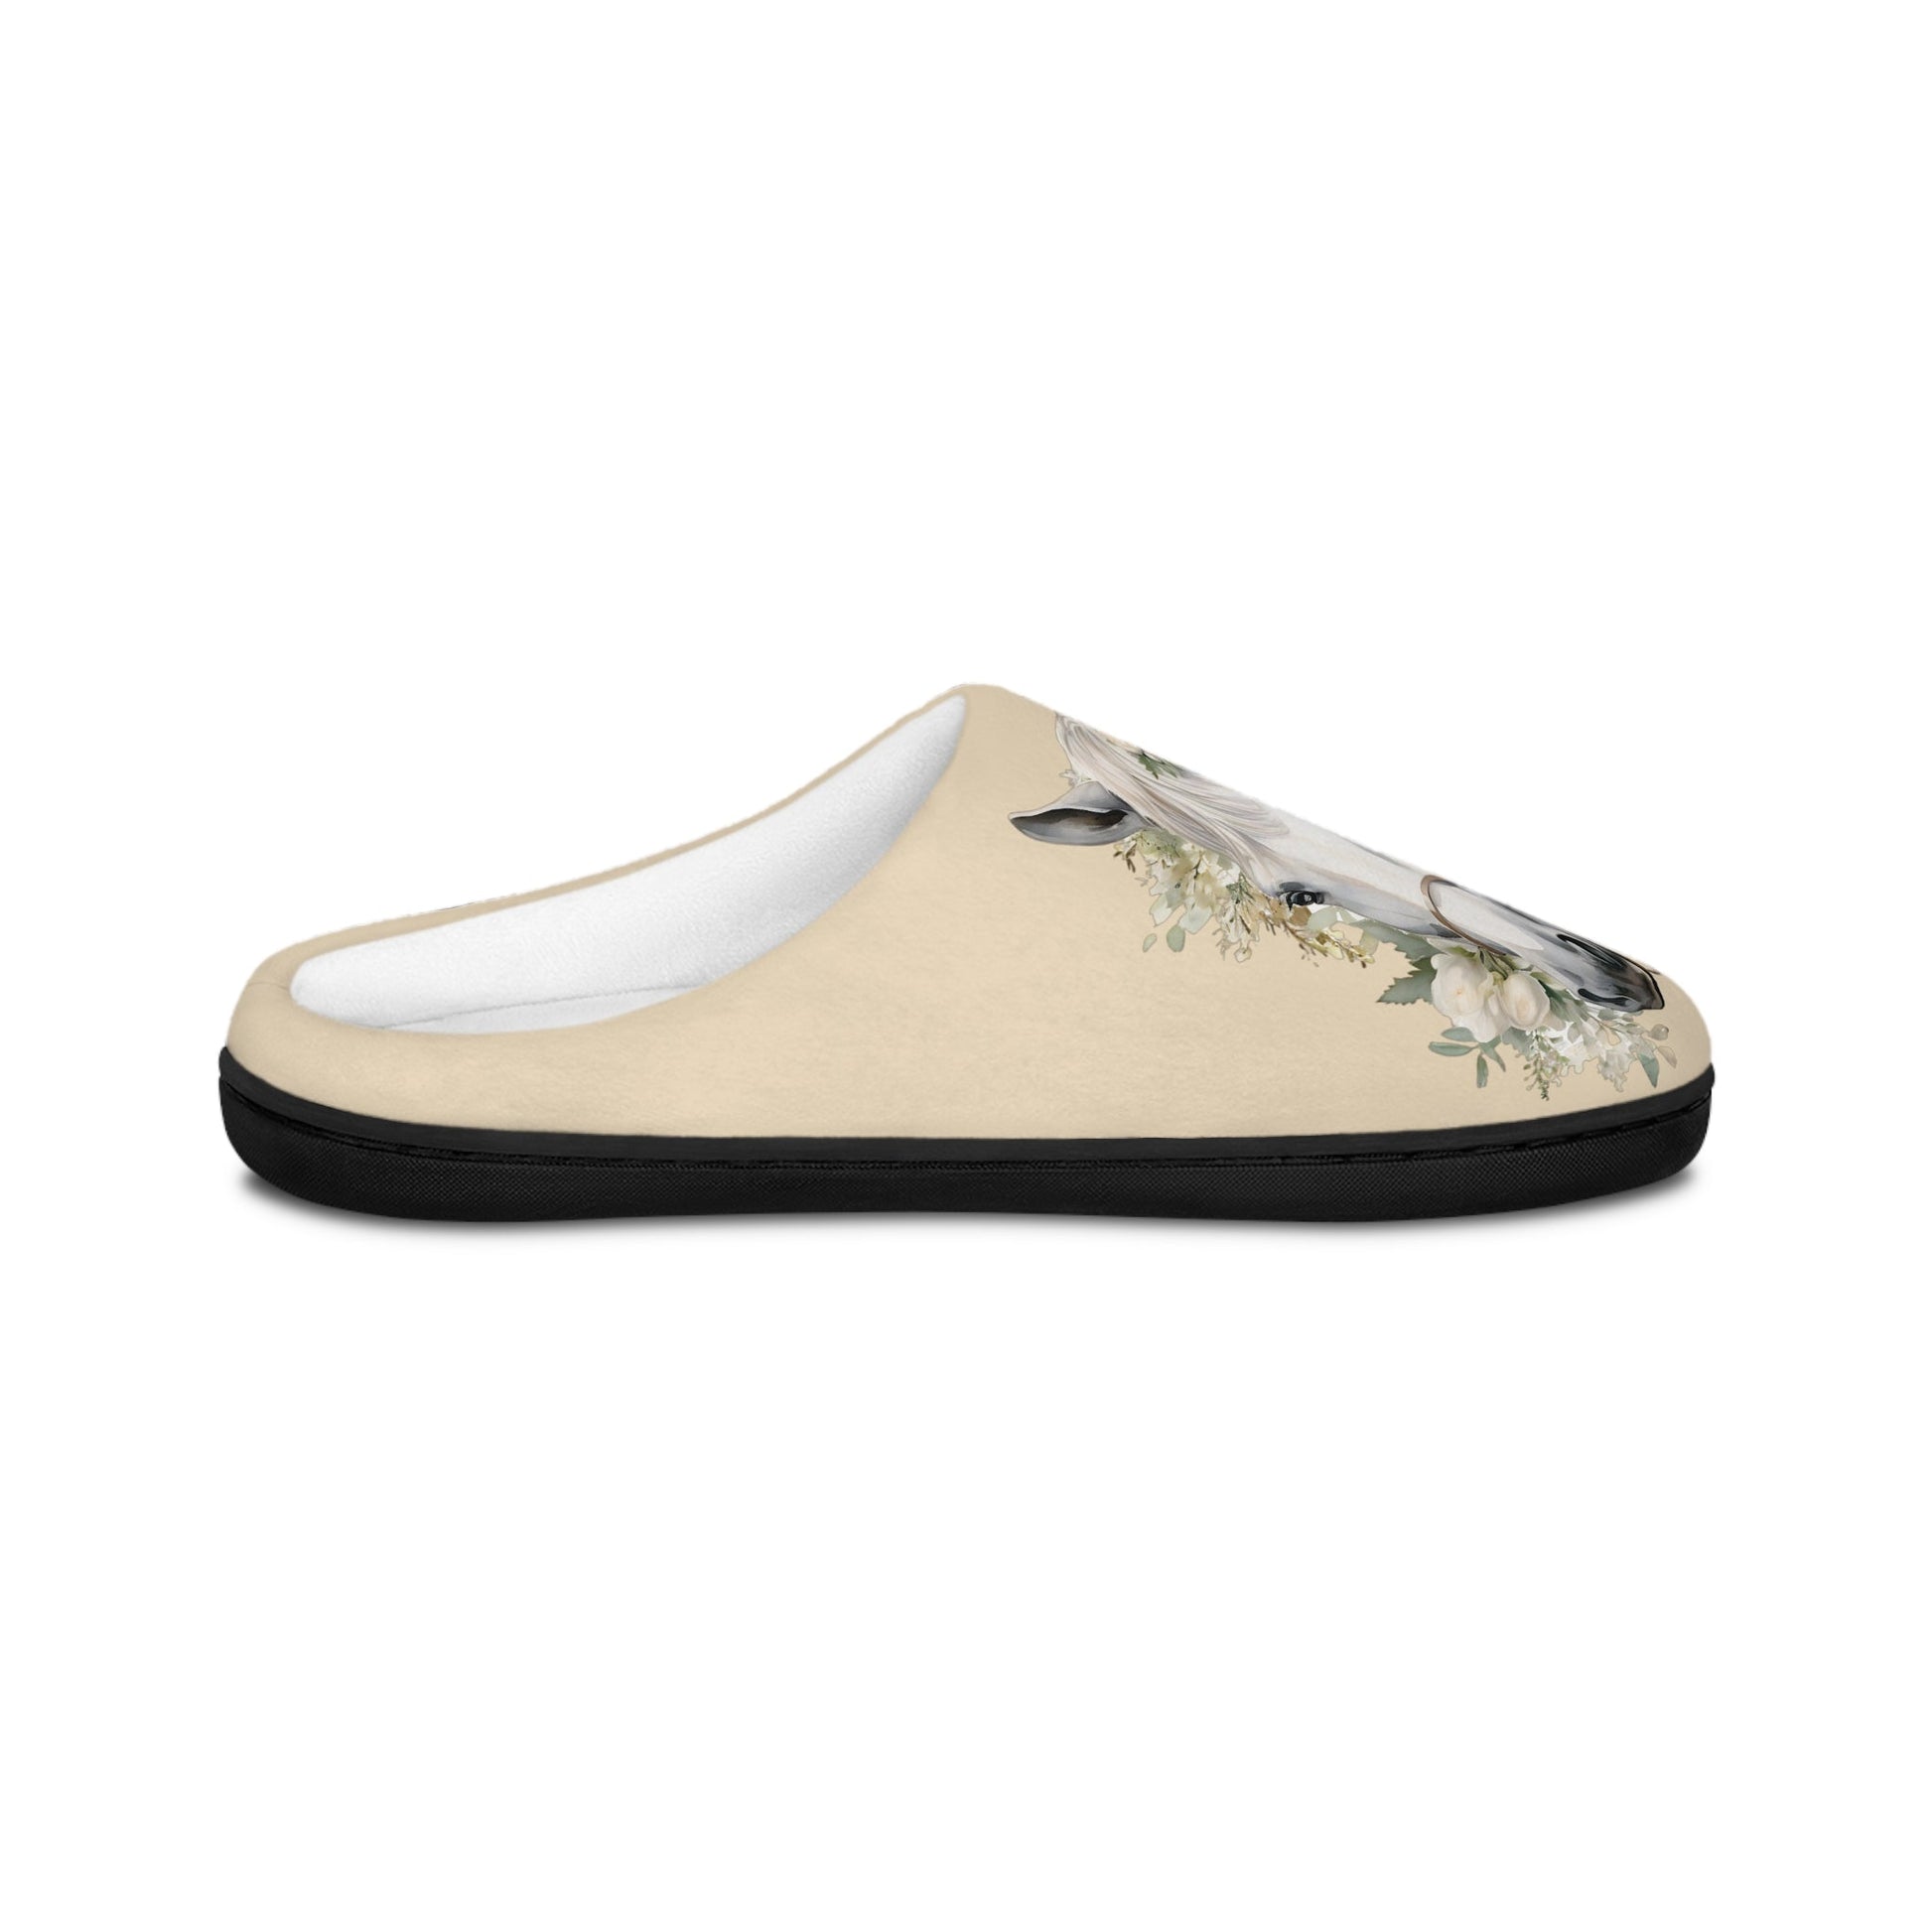 Dreamy White Horse and Roses Slippers, Comfy Pair of Slip-On Scuffs - FlooredByArt